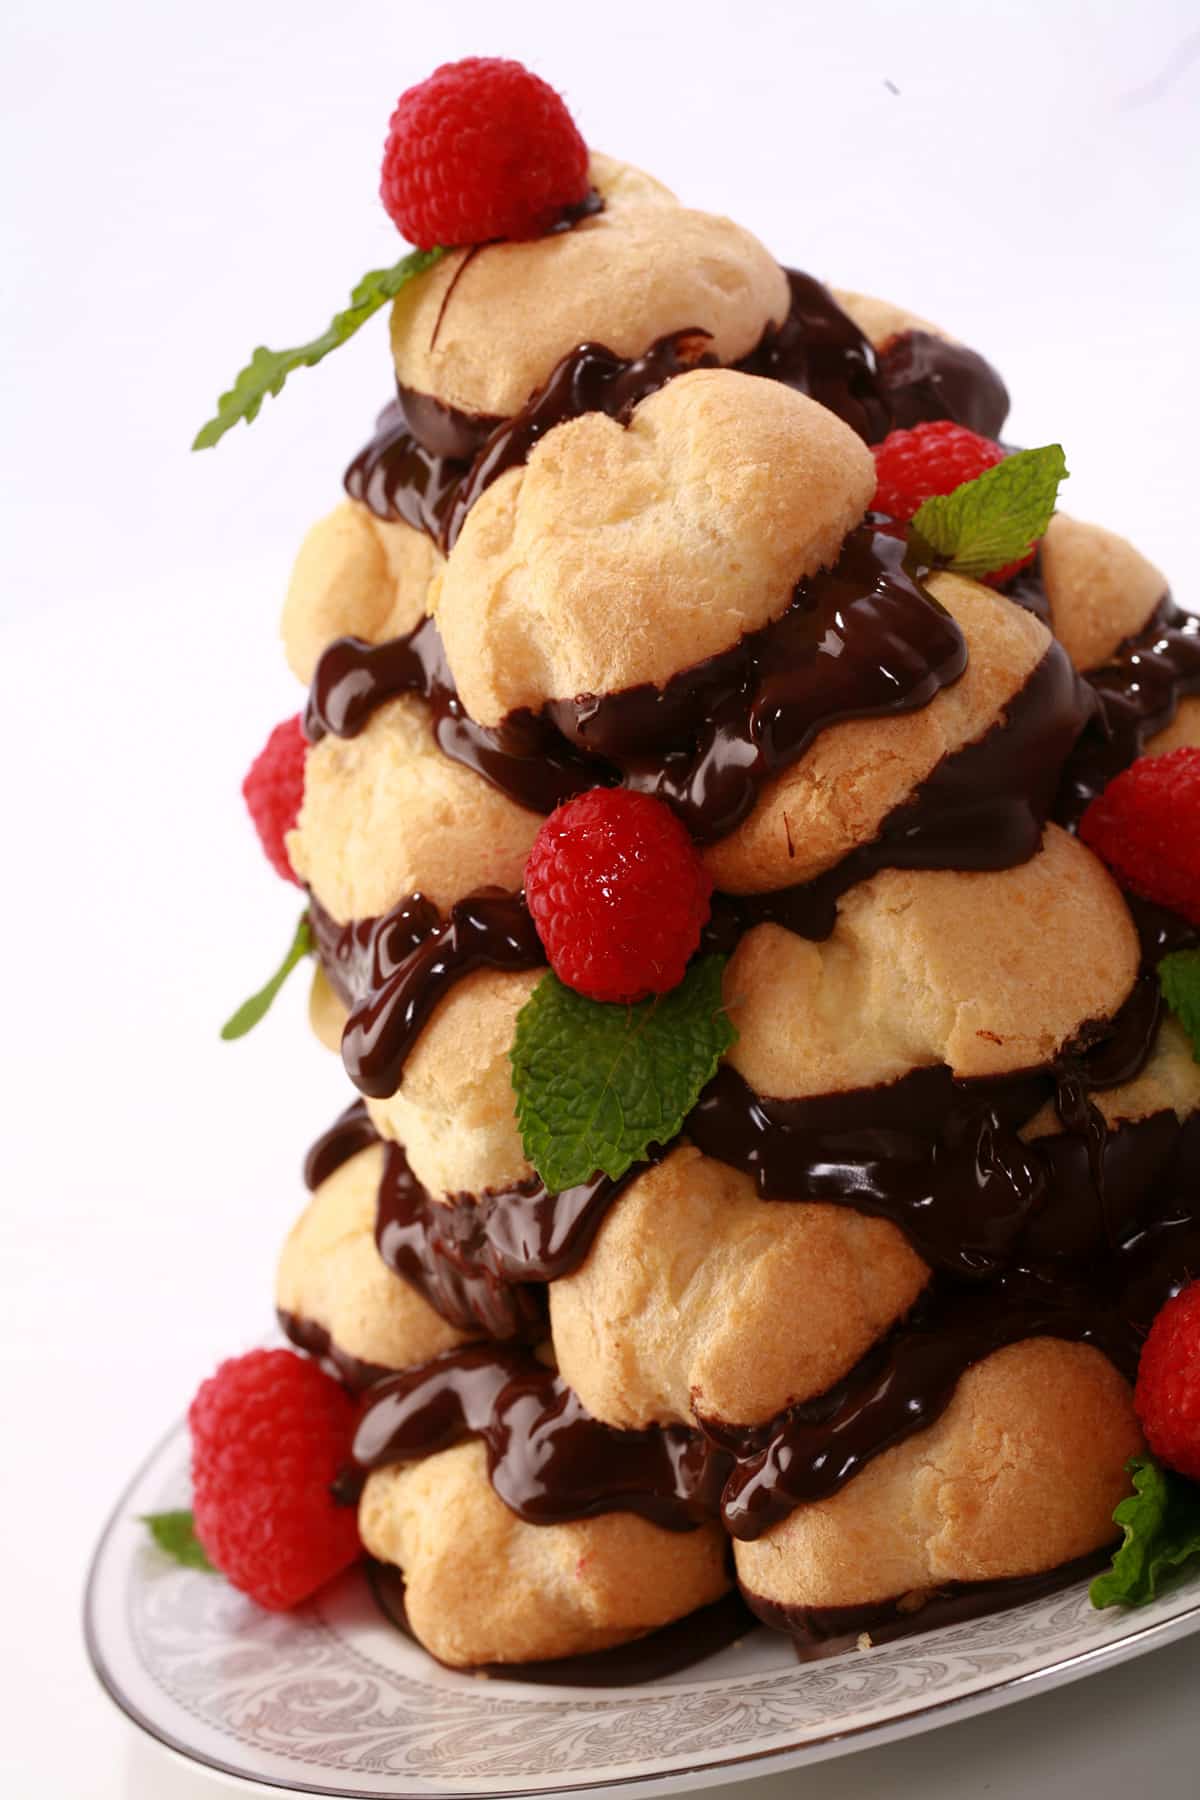 A mini chocolate croquembouche with raspberries and mint.